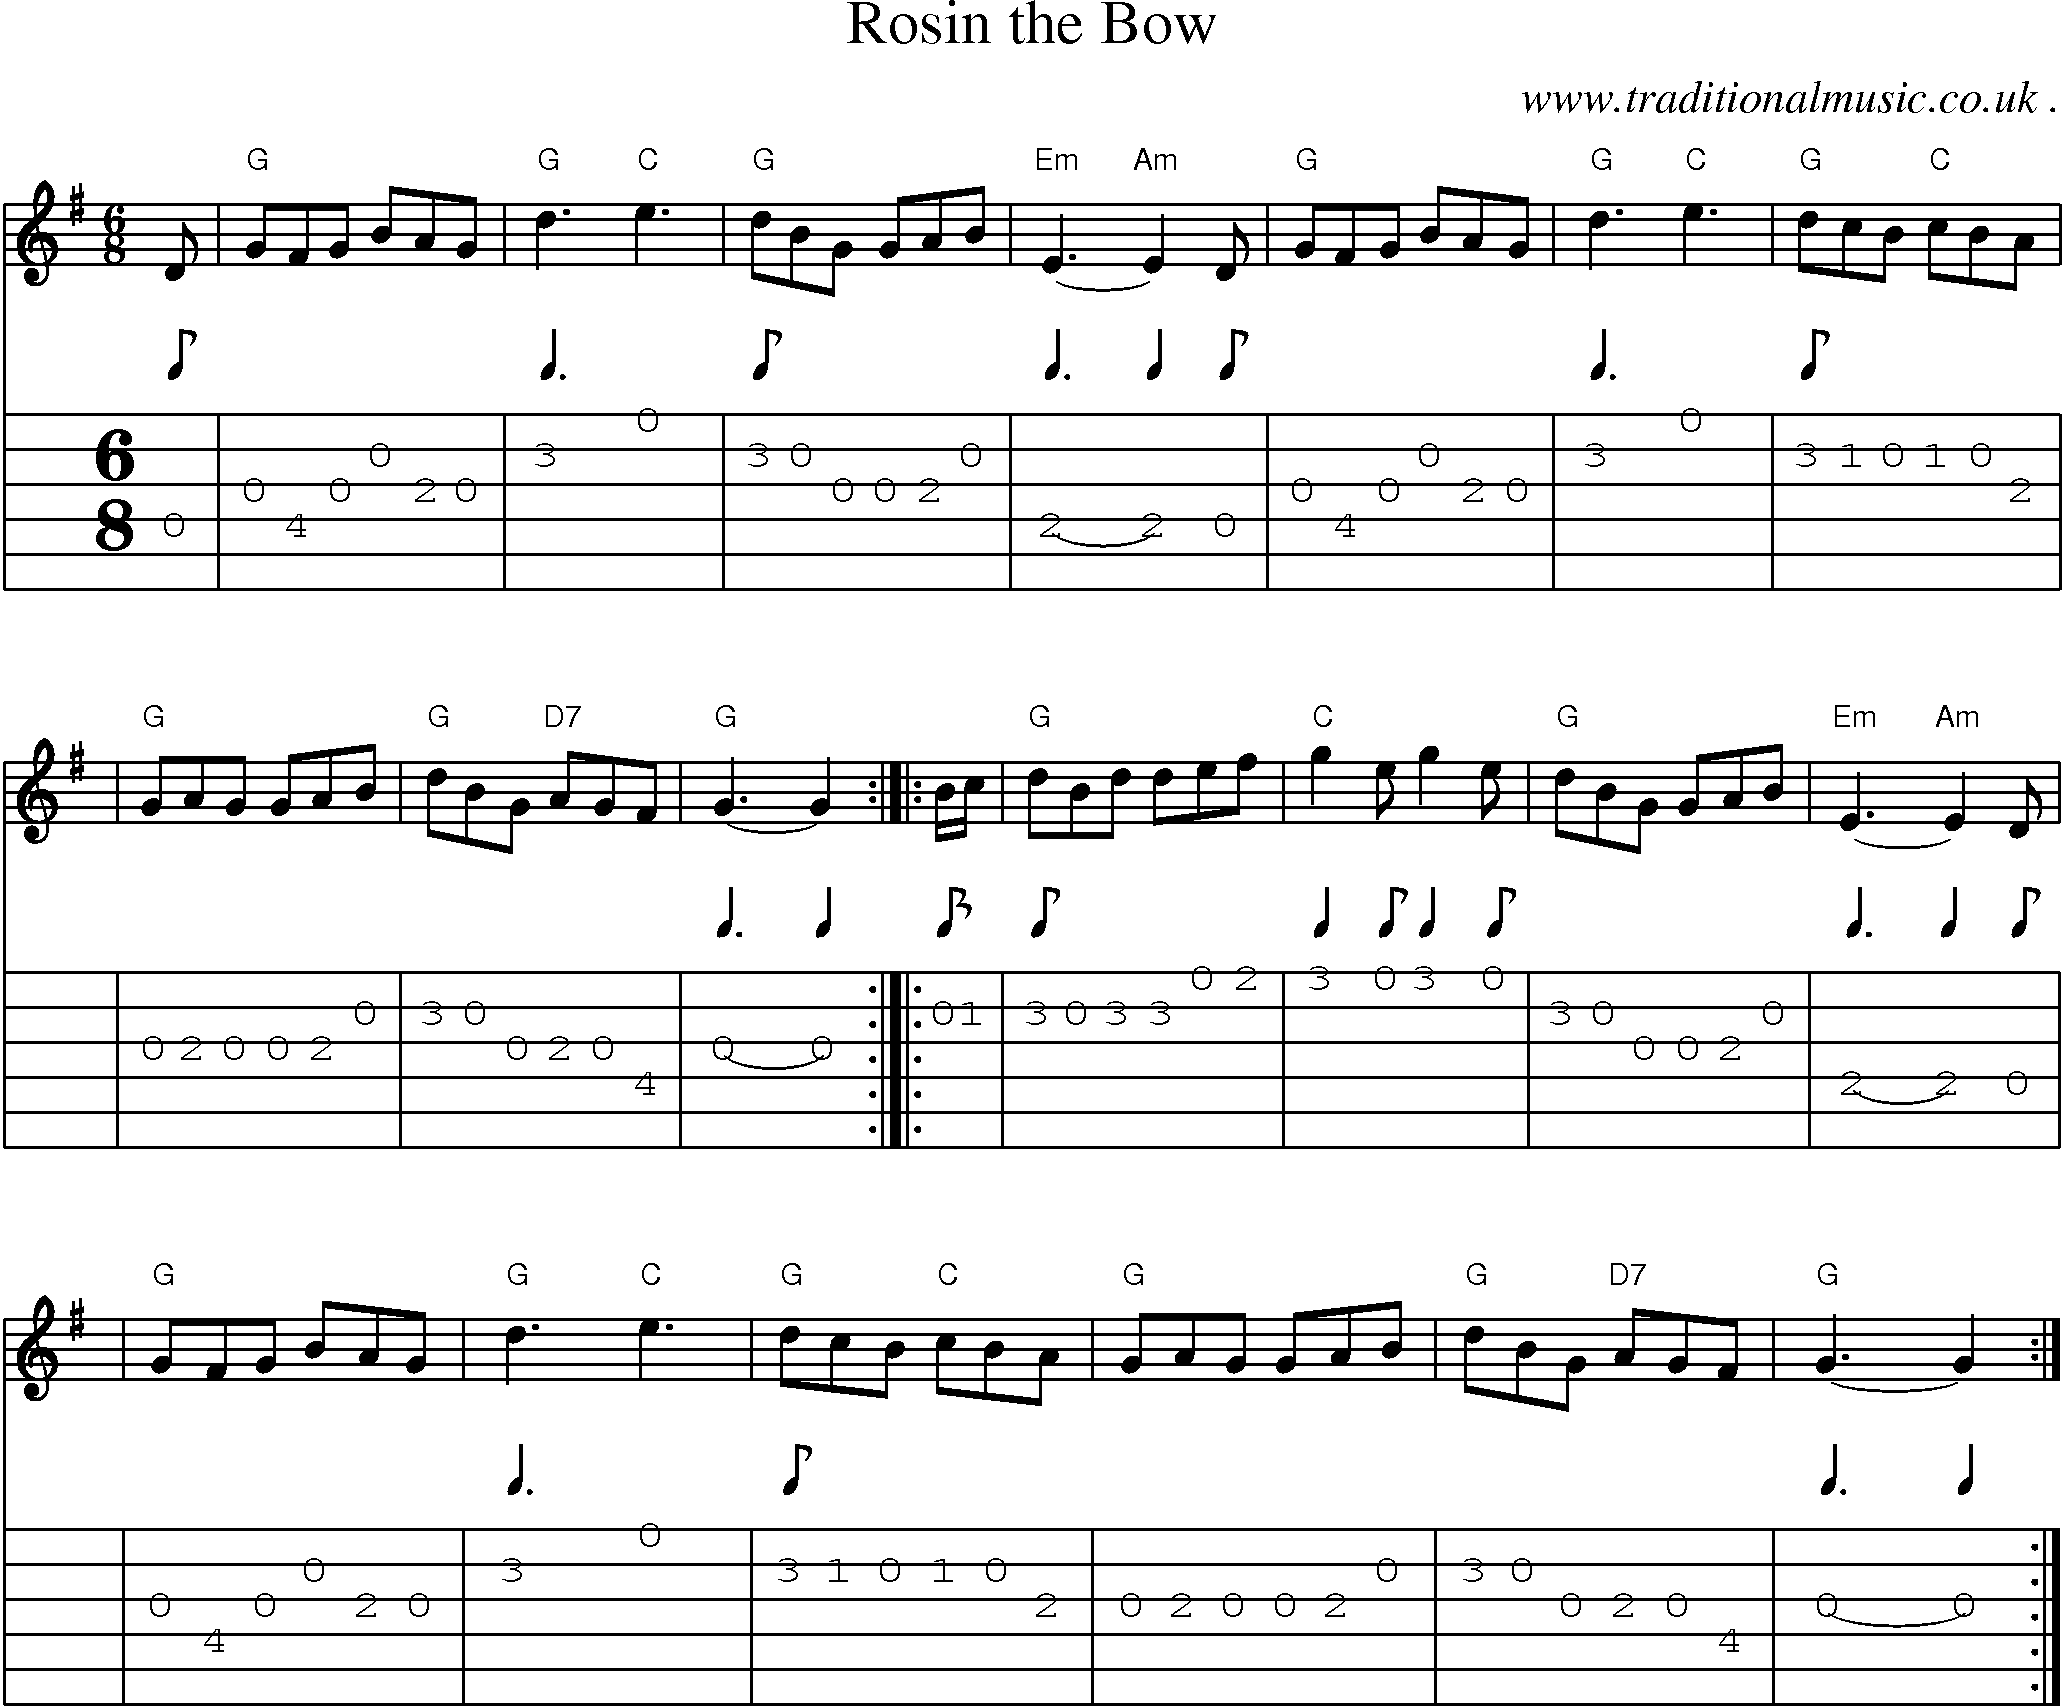 Sheet-music  score, Chords and Guitar Tabs for Rosin The Bow